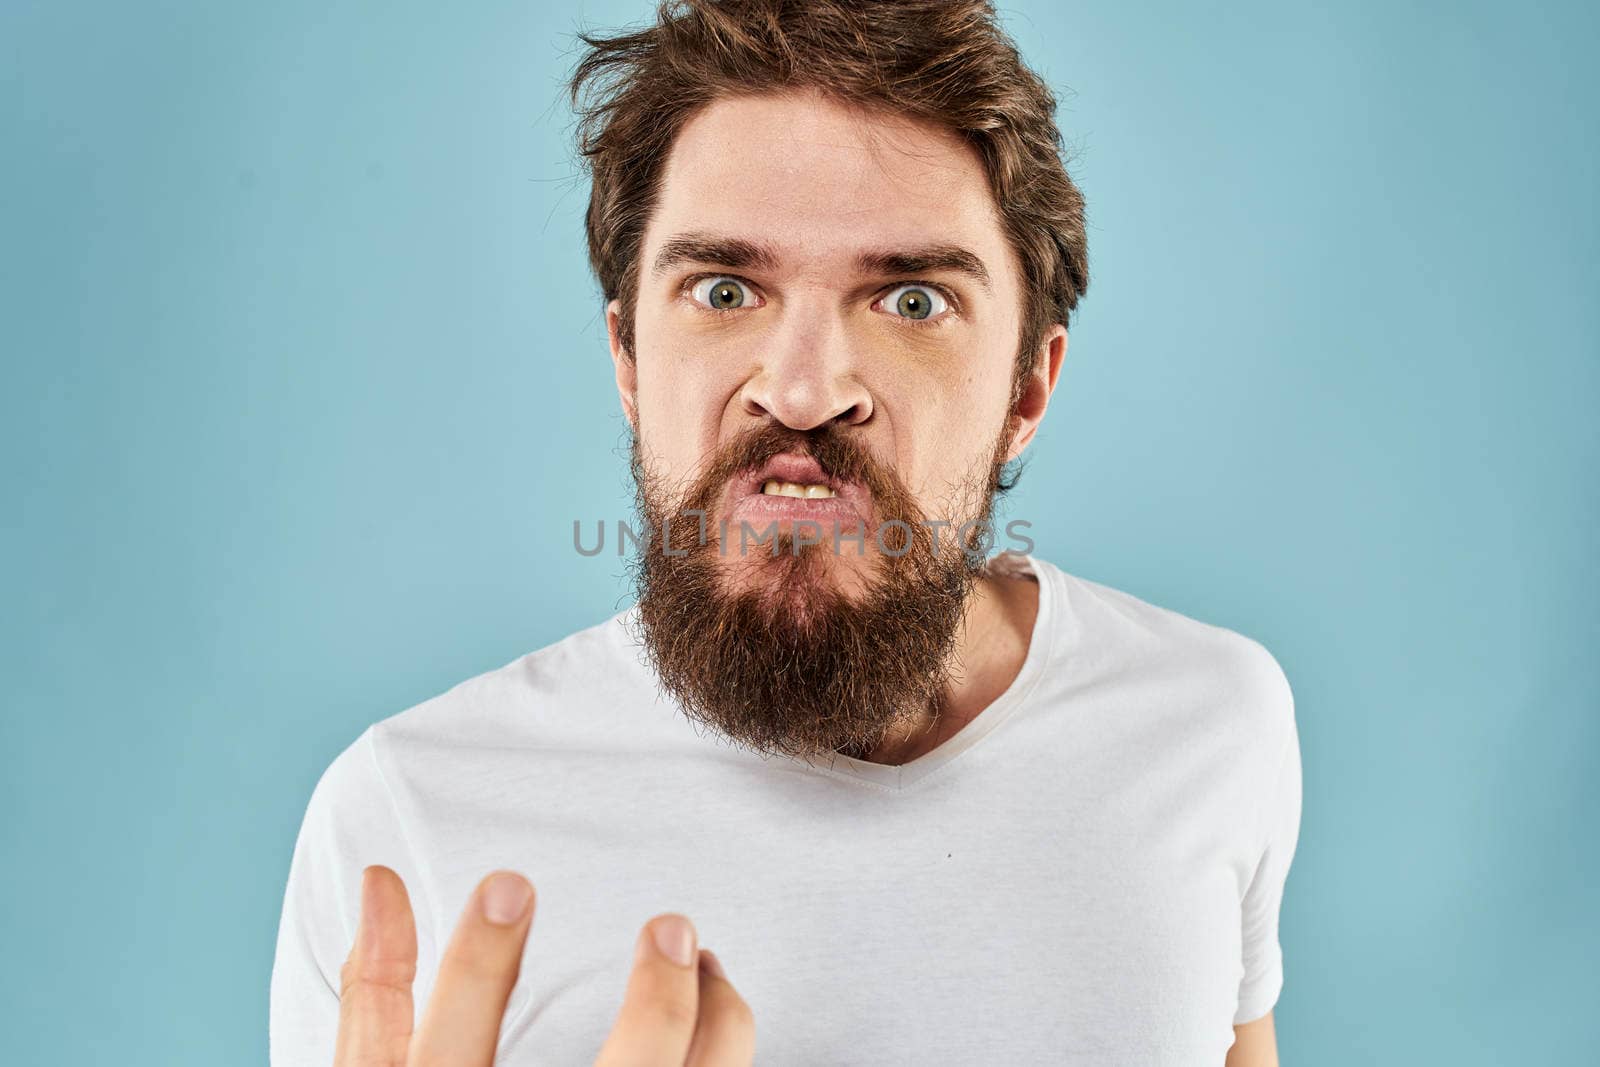 Man with disgruntled facial expression gesturing with hands studio lifestyle blue background. High quality photo